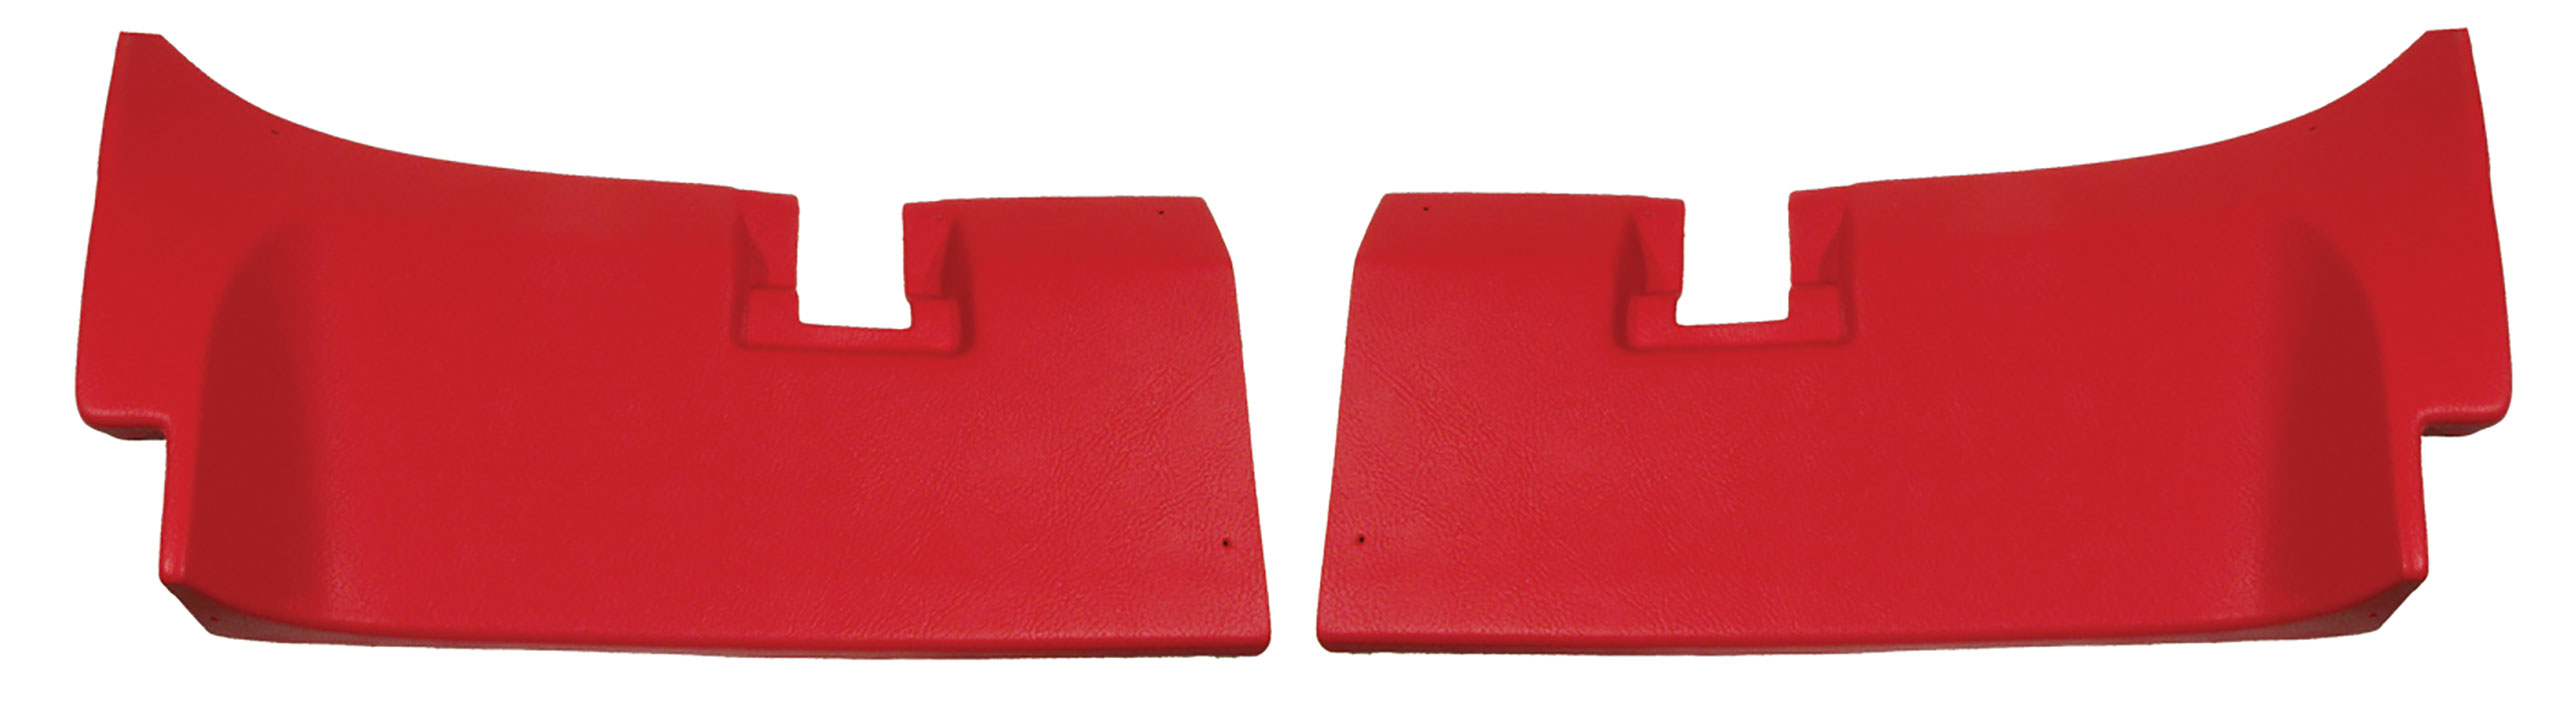 Rear Coupe Roof Panels- Red For 1969-1972 Corvette